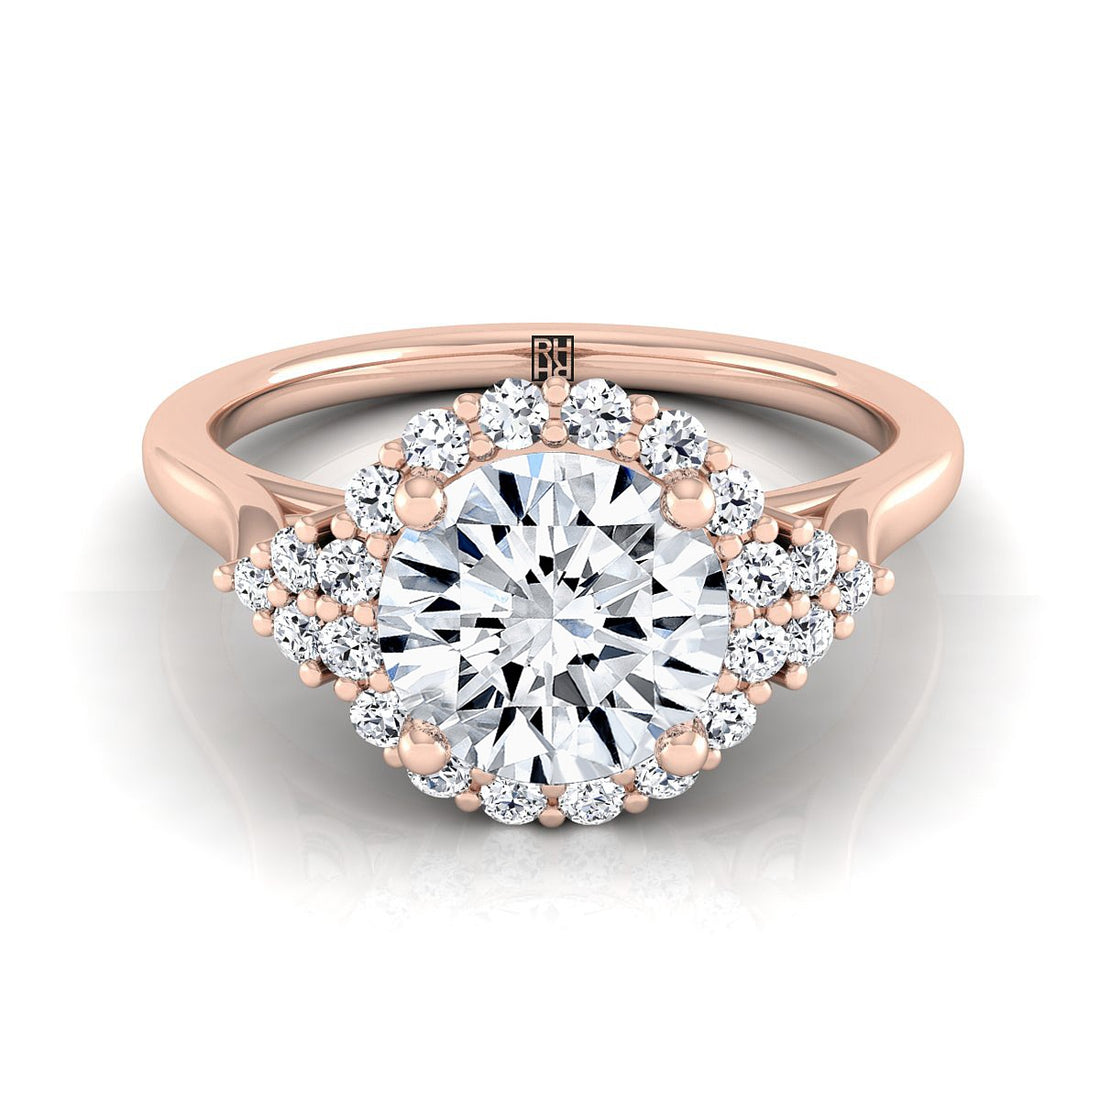 How to Know All about Diamond Rings?